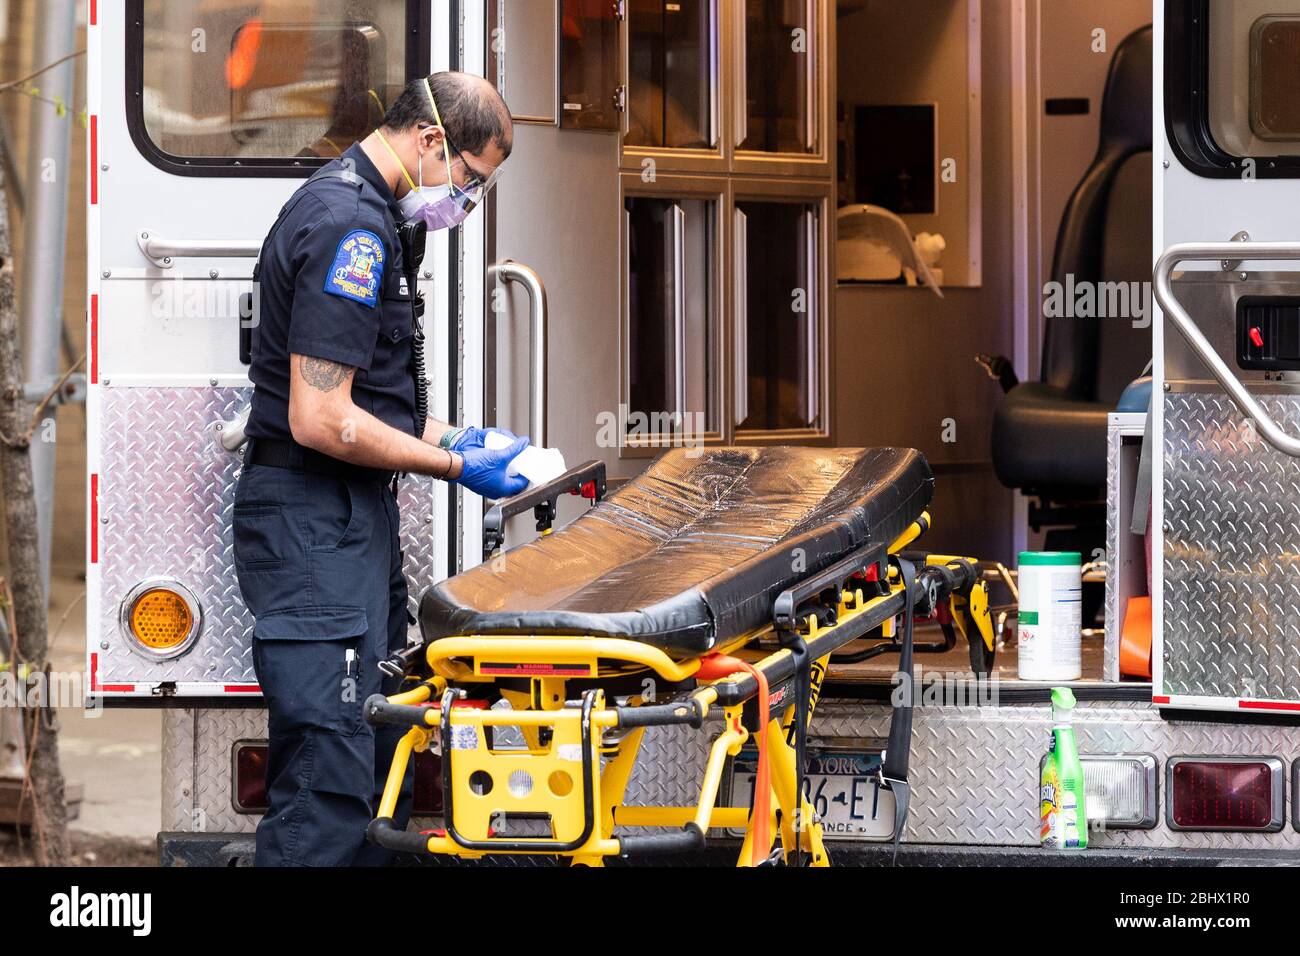 New York, United States. 27th Apr, 2020. Ambulance staff clean and disinfect a gurney after transporting patients to a hospital. Credit: SOPA Images Limited/Alamy Live News Stock Photo